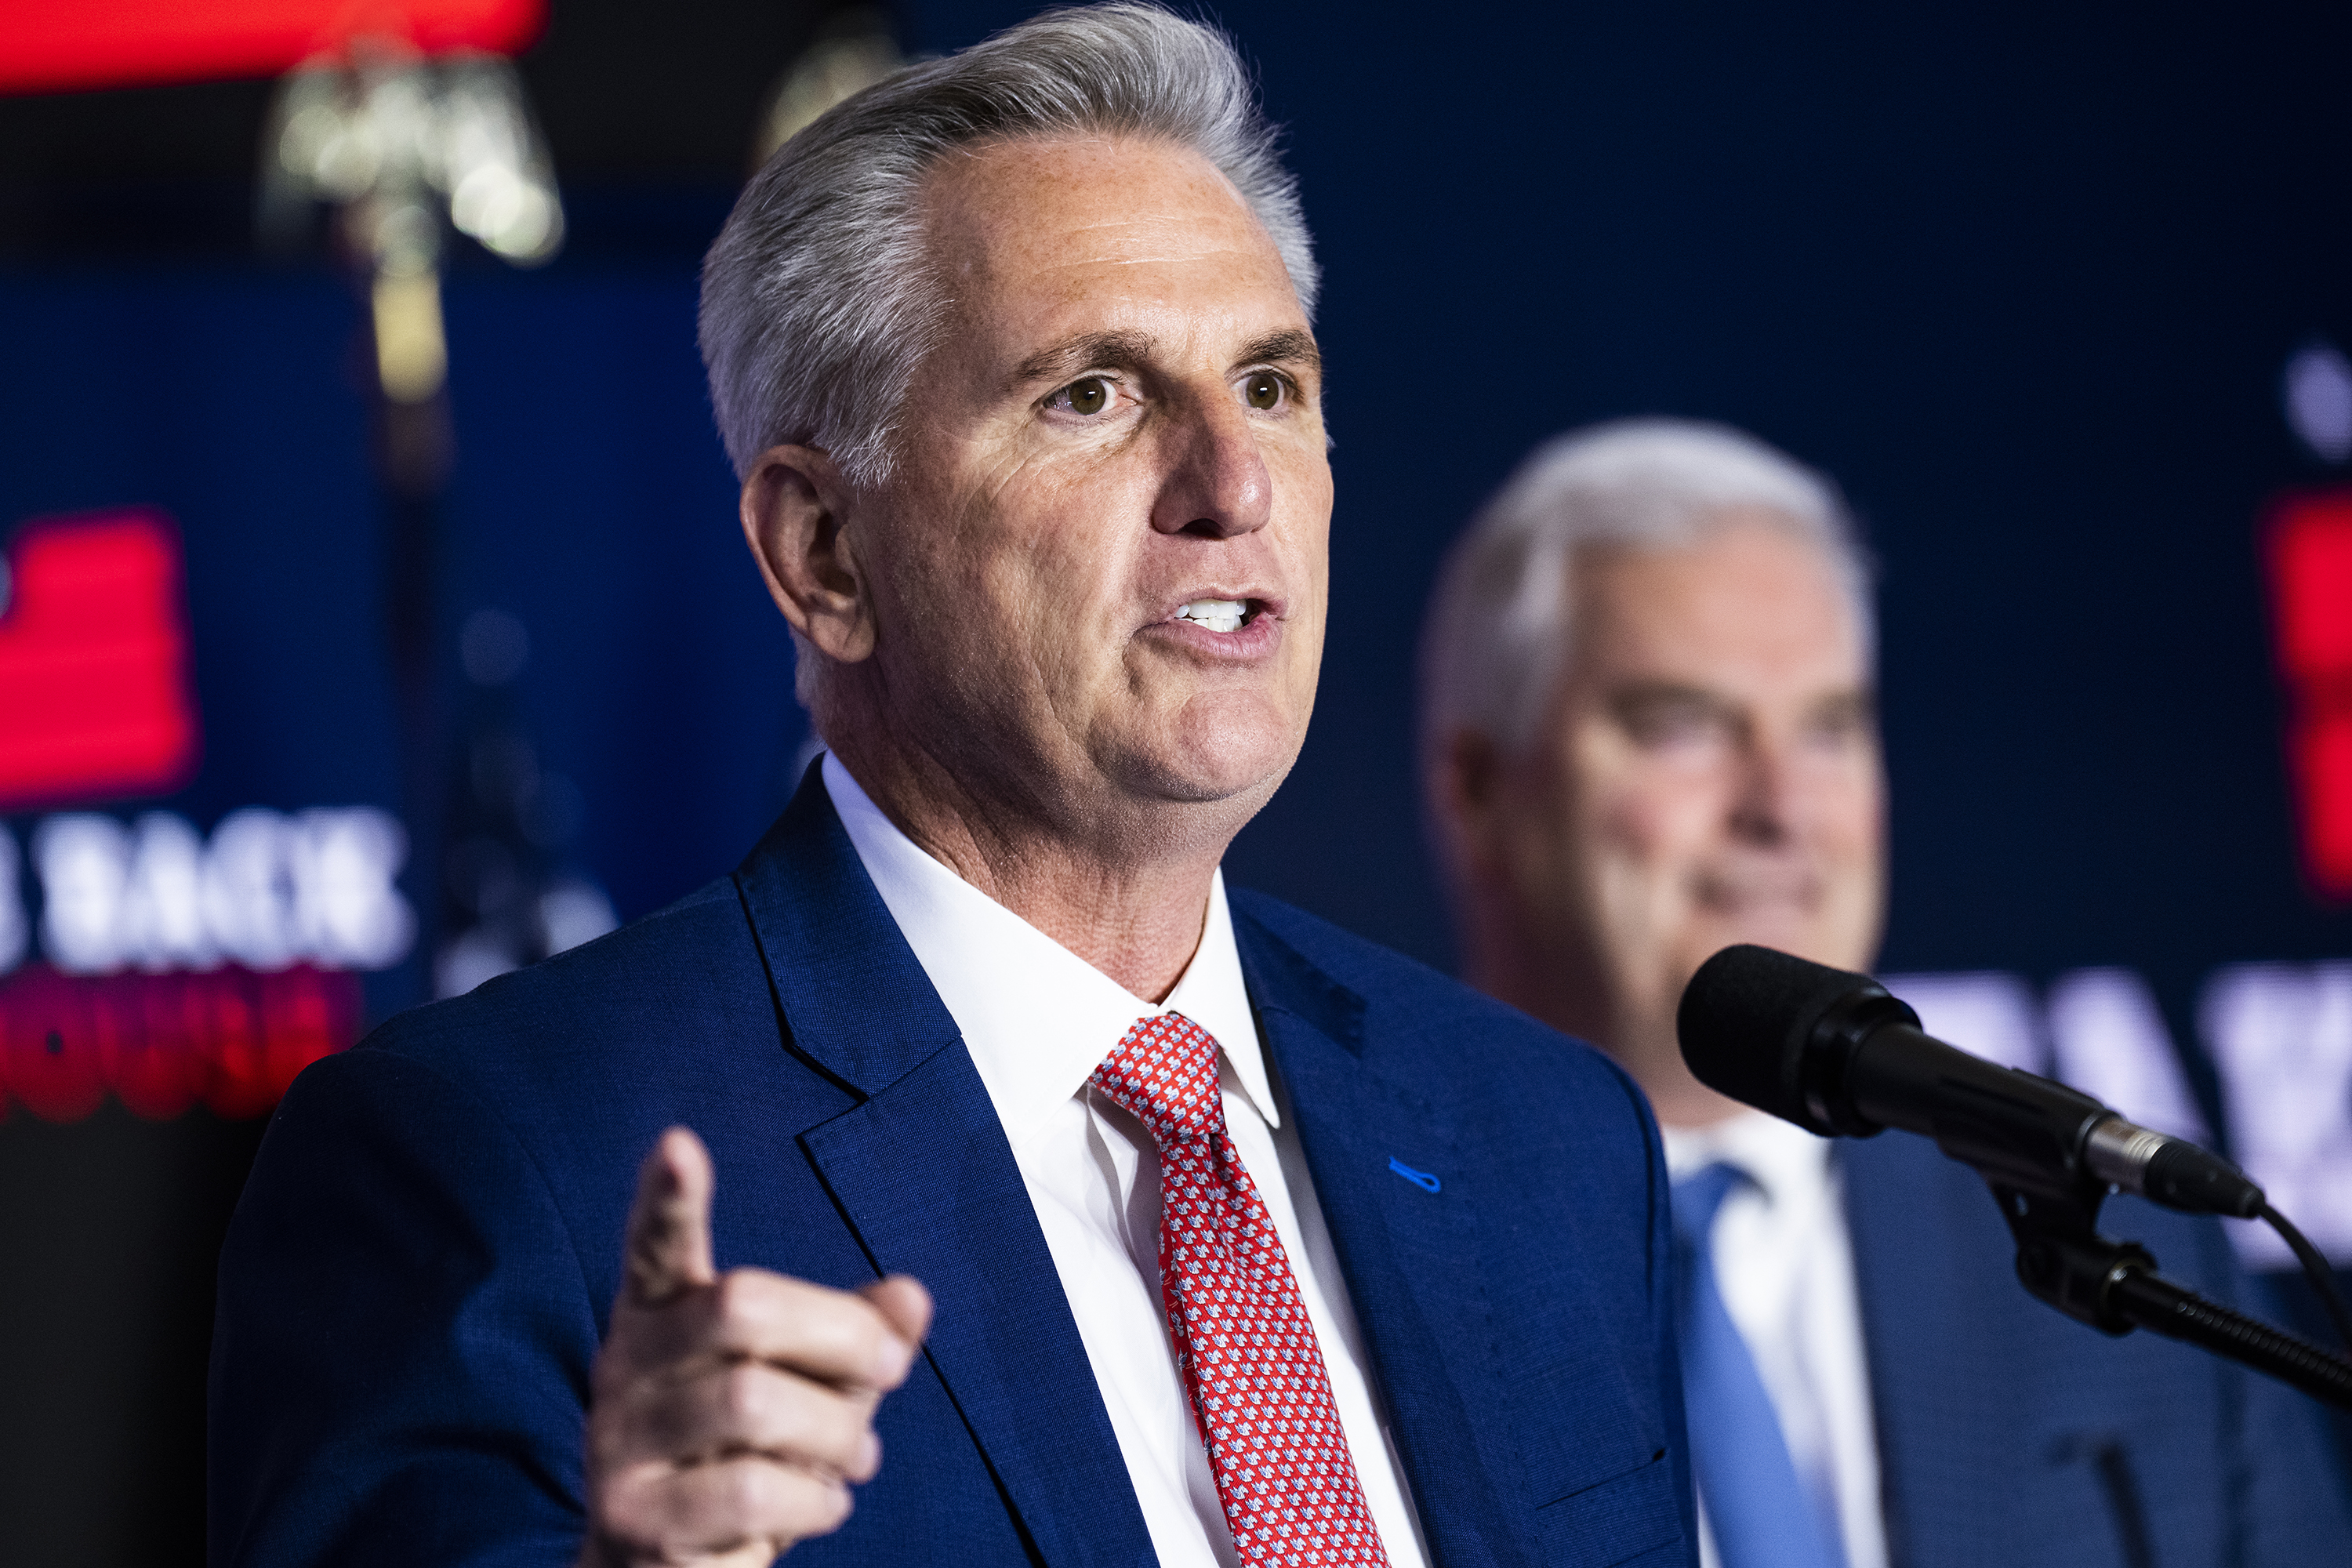 House Minority Leader Kevin McCarthy addresses an election night party at The Westin Washington hotel in Washington, DC, on Tuesday, November 8.